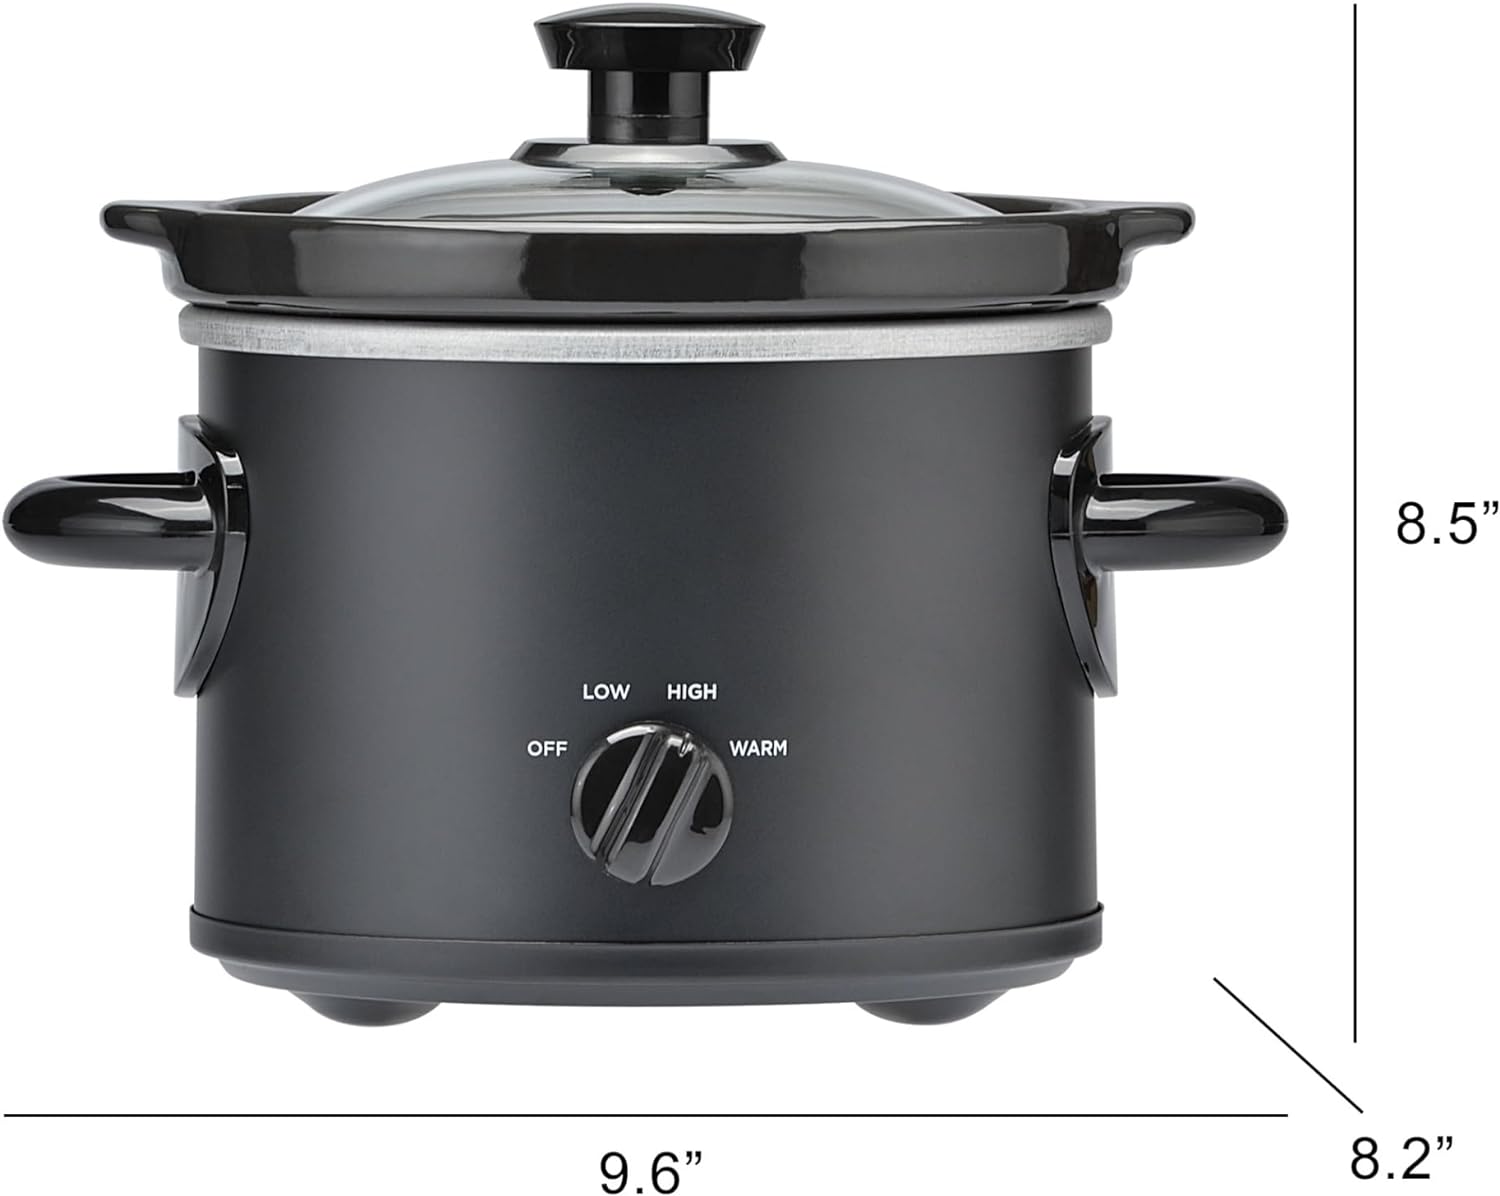 2 QT Slow Cooker in Matte Black - Effortlessly Cook Delicious Meals for Small Families